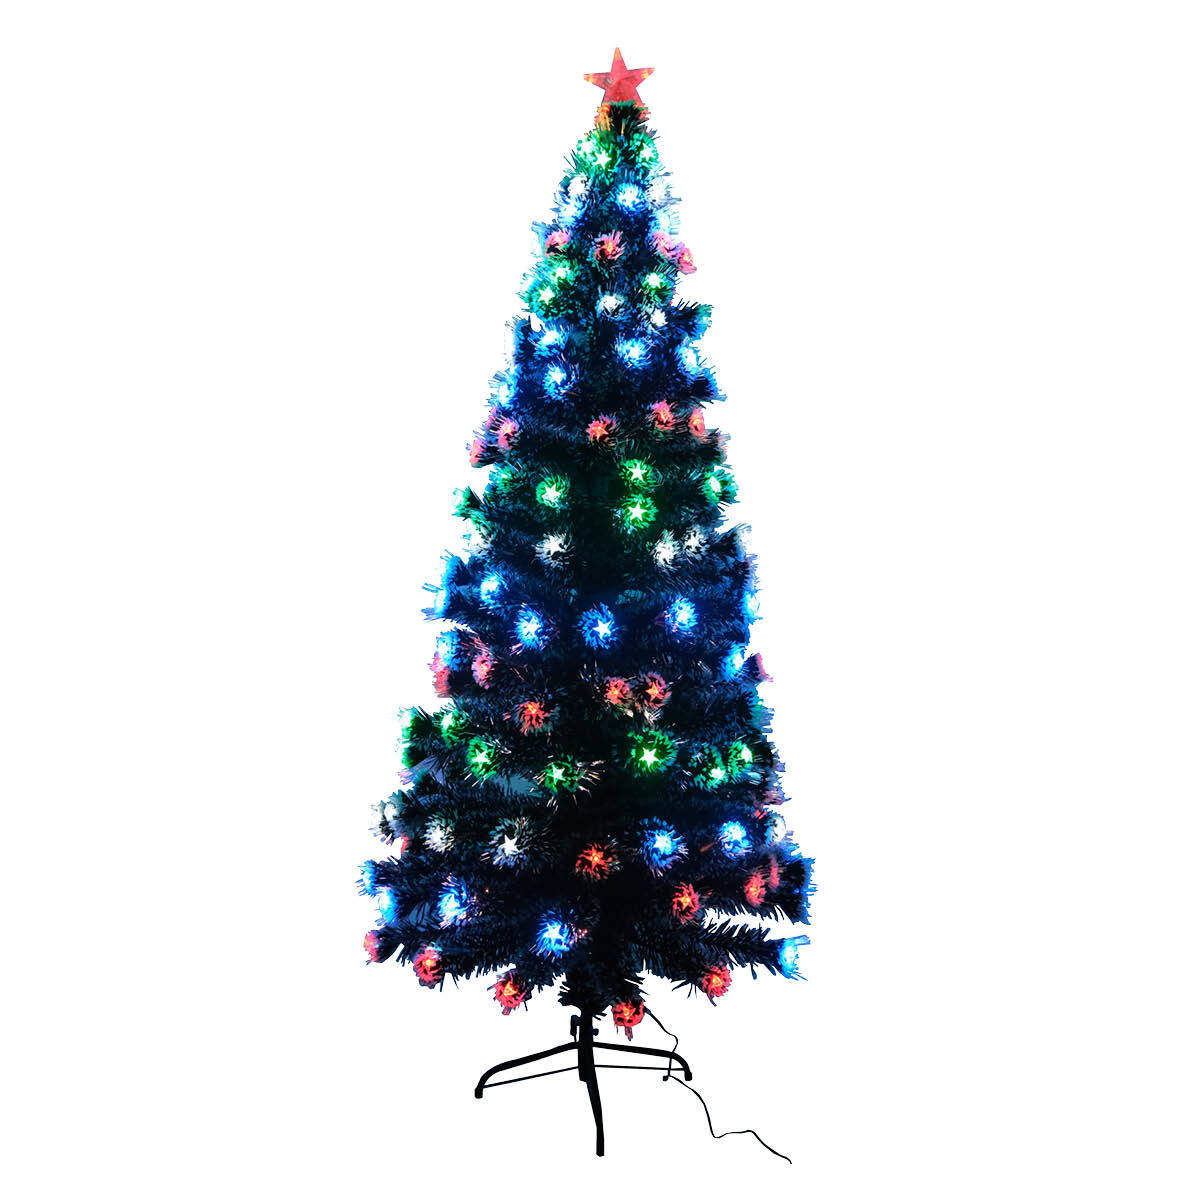 Christmas By Sas 1.8m Pine Tree 210 Multi-Colour LED Lights With 8 Functions Deals499